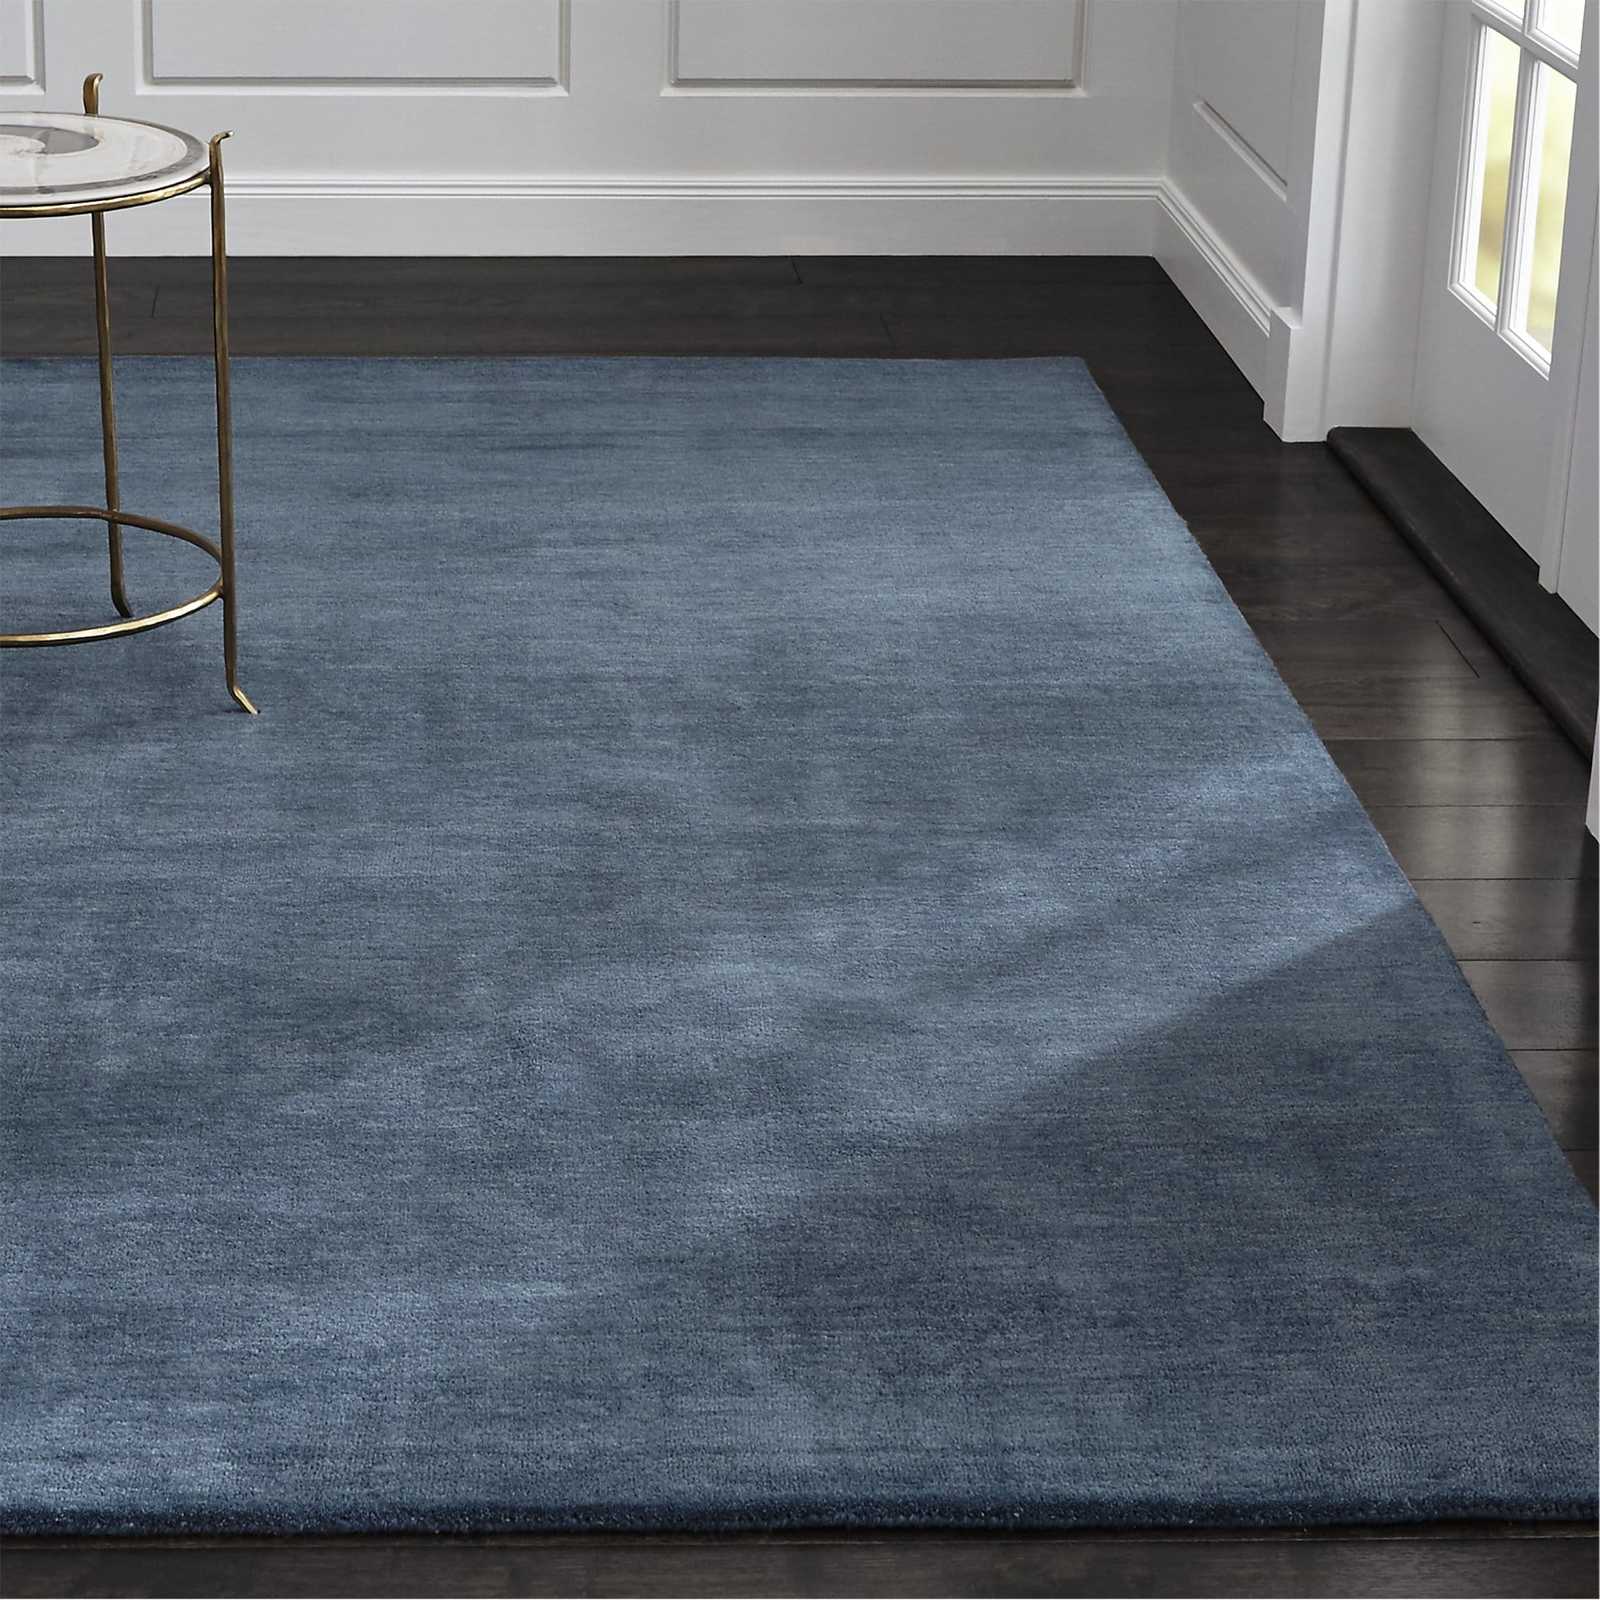 Primary image for Area Rugs 6' x 9' Baxter Blue Hand Tufted Crate & Barrel Soft Woolen Carpet